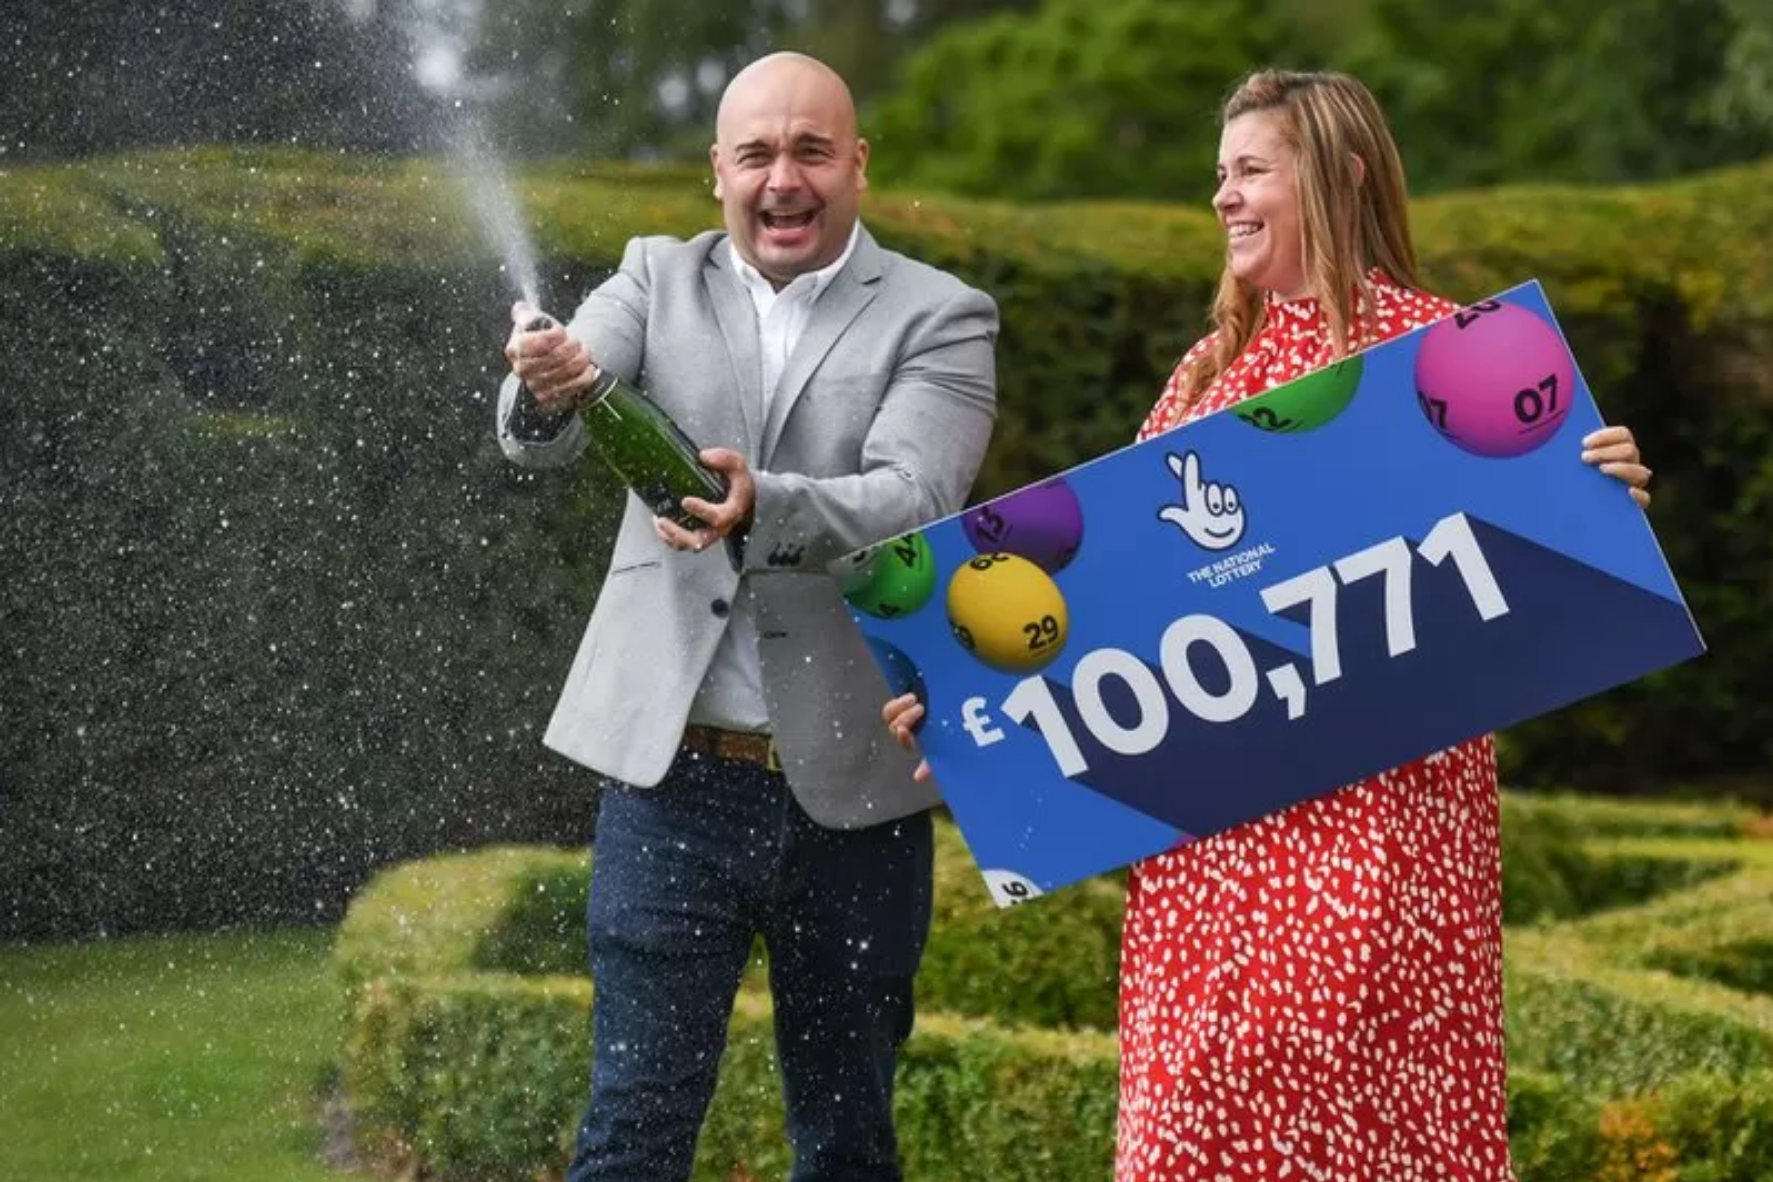 Stourport-on-Severn Couple Plan to Use EuroMillions Winnings to Fund Fostering Dream